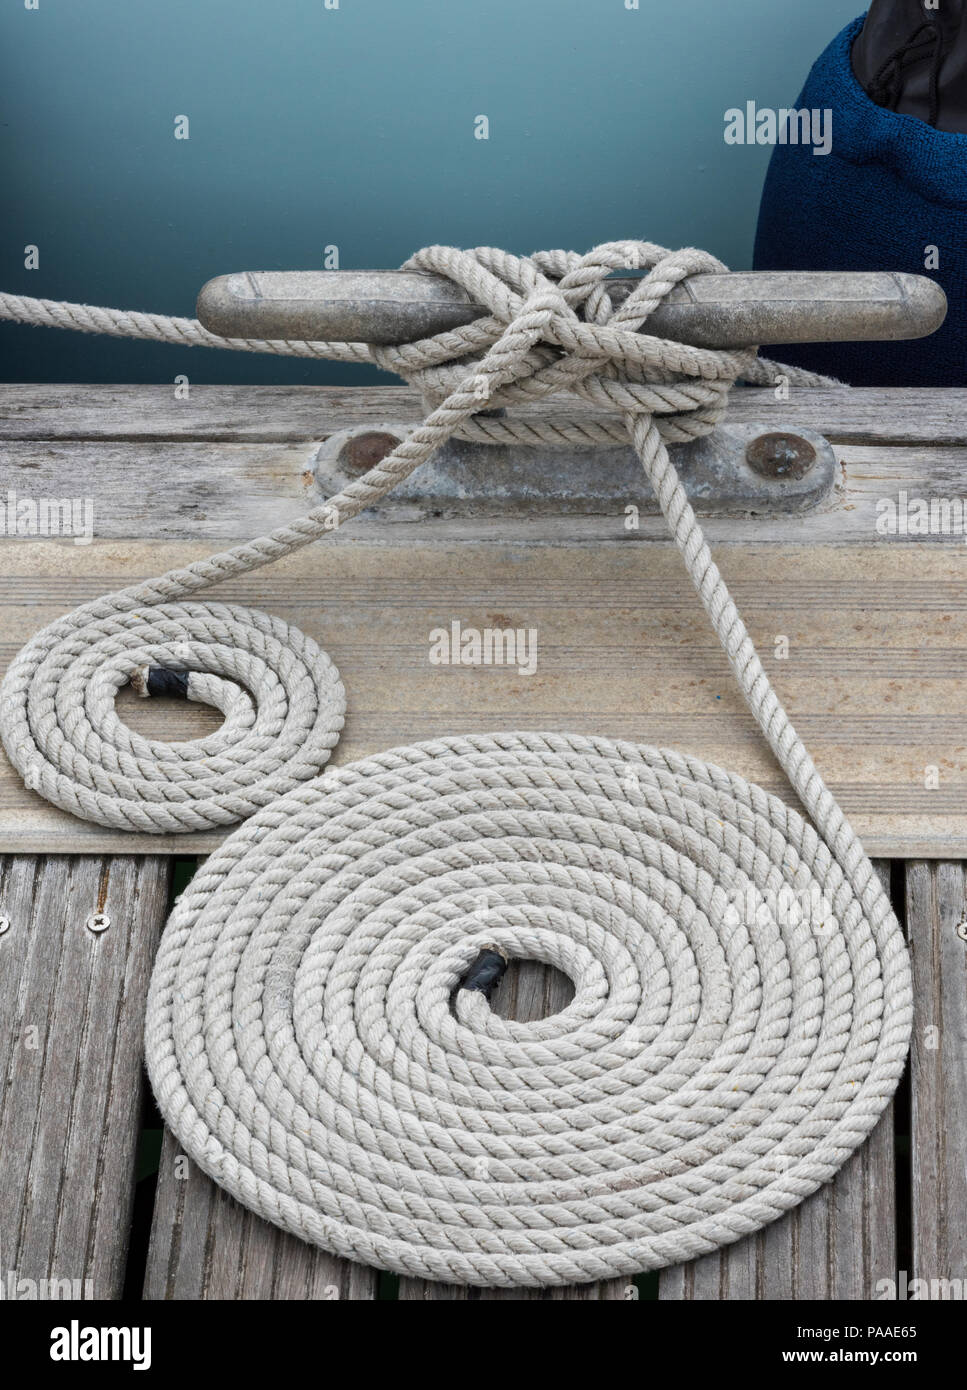 neatly coiled rope on a wooden jetty in a yacht marina. Rope cheeses or  cheesed down Stock Photo - Alamy